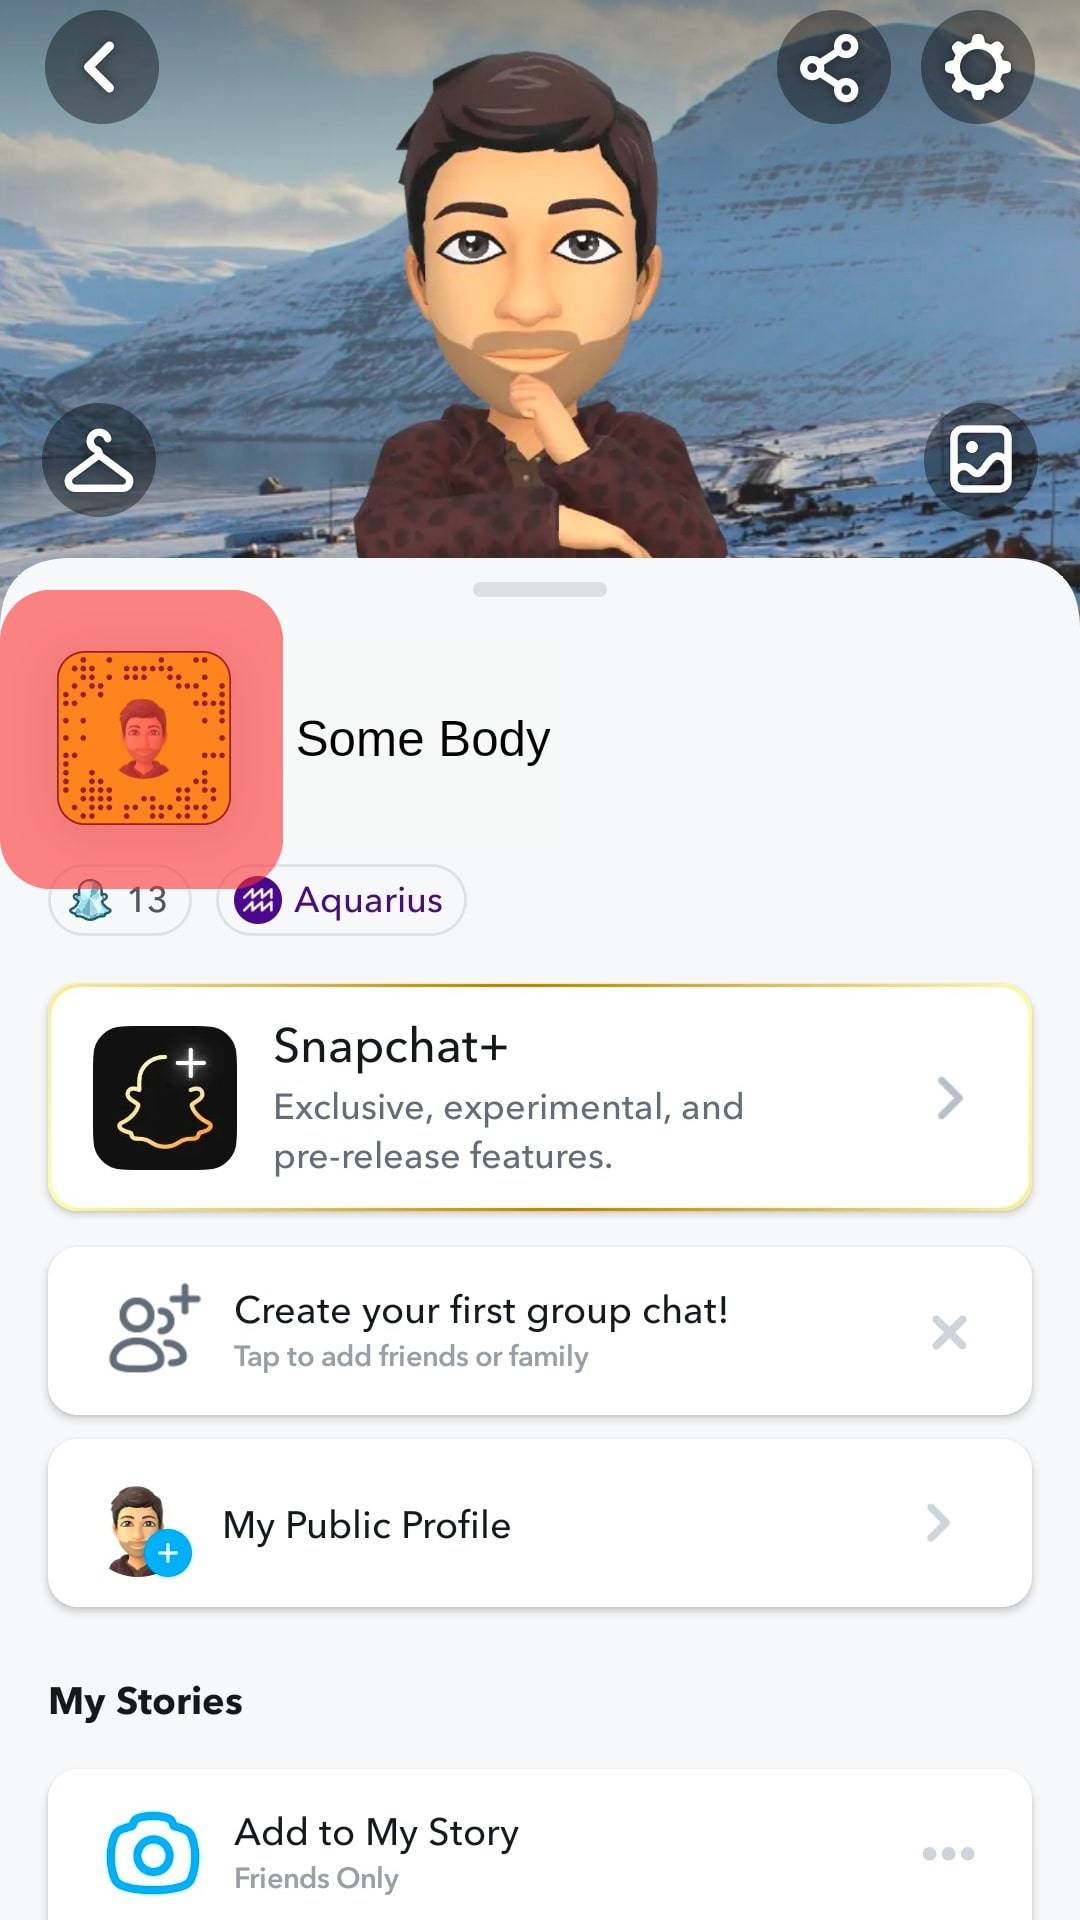 Click The Snap Symbol To Show The Snapcode.